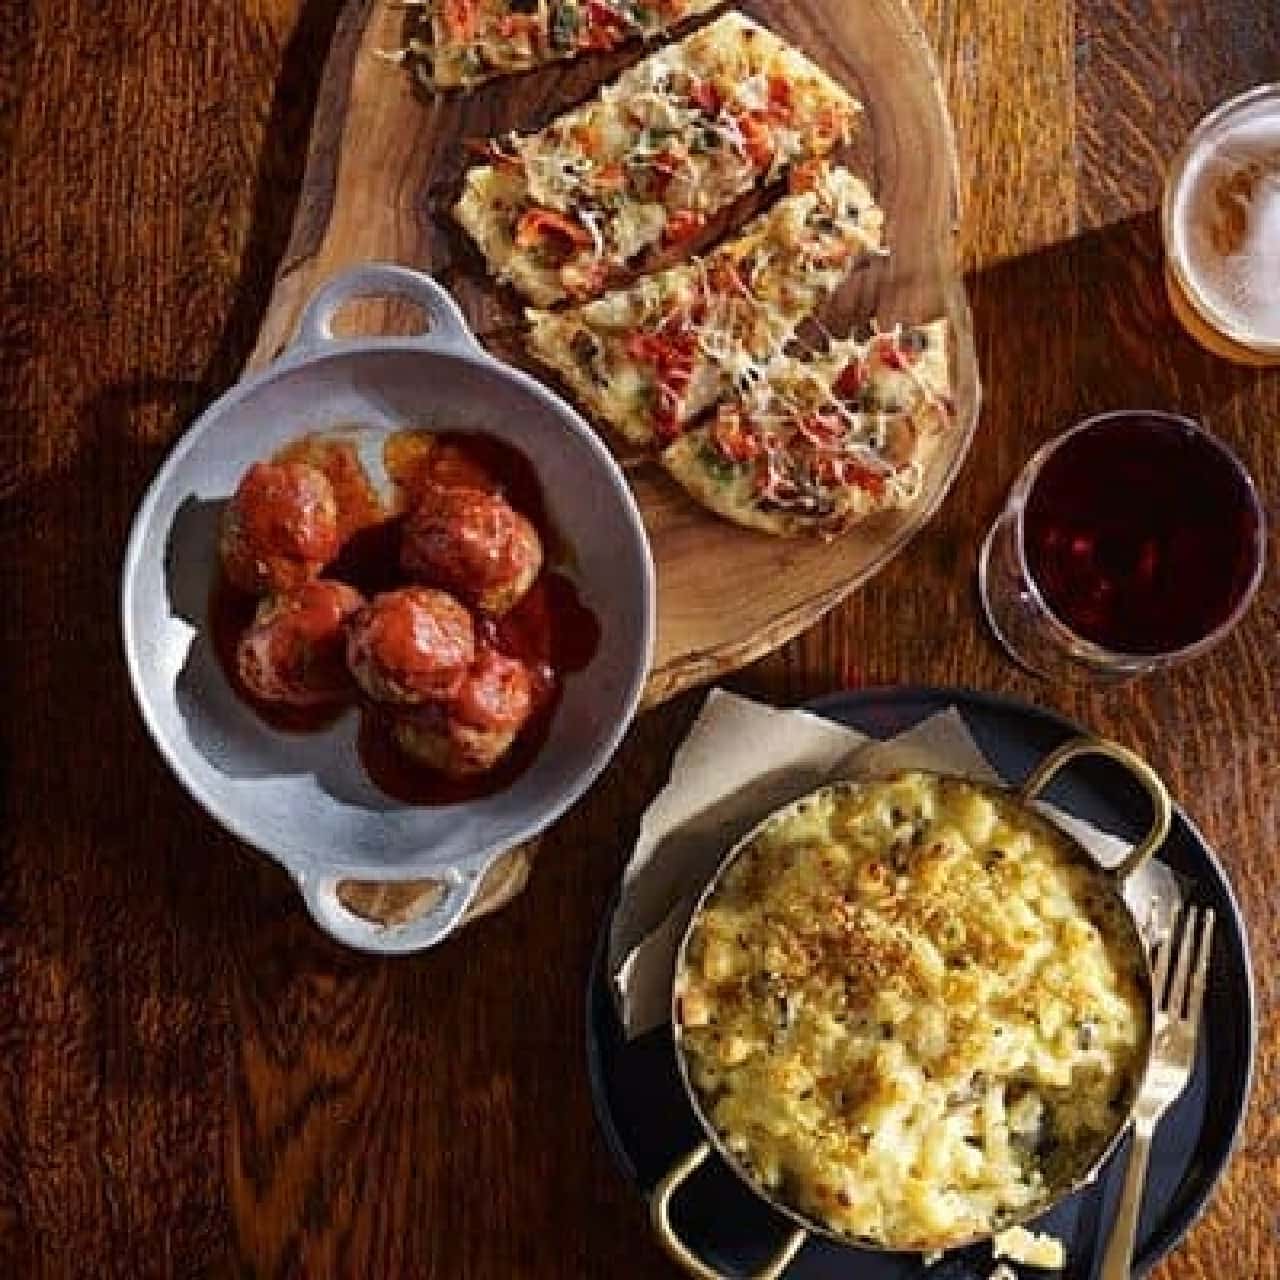 Small plate provided by STARBUCKS EVENINGS (Image is image / Source: US Starbucks official website)